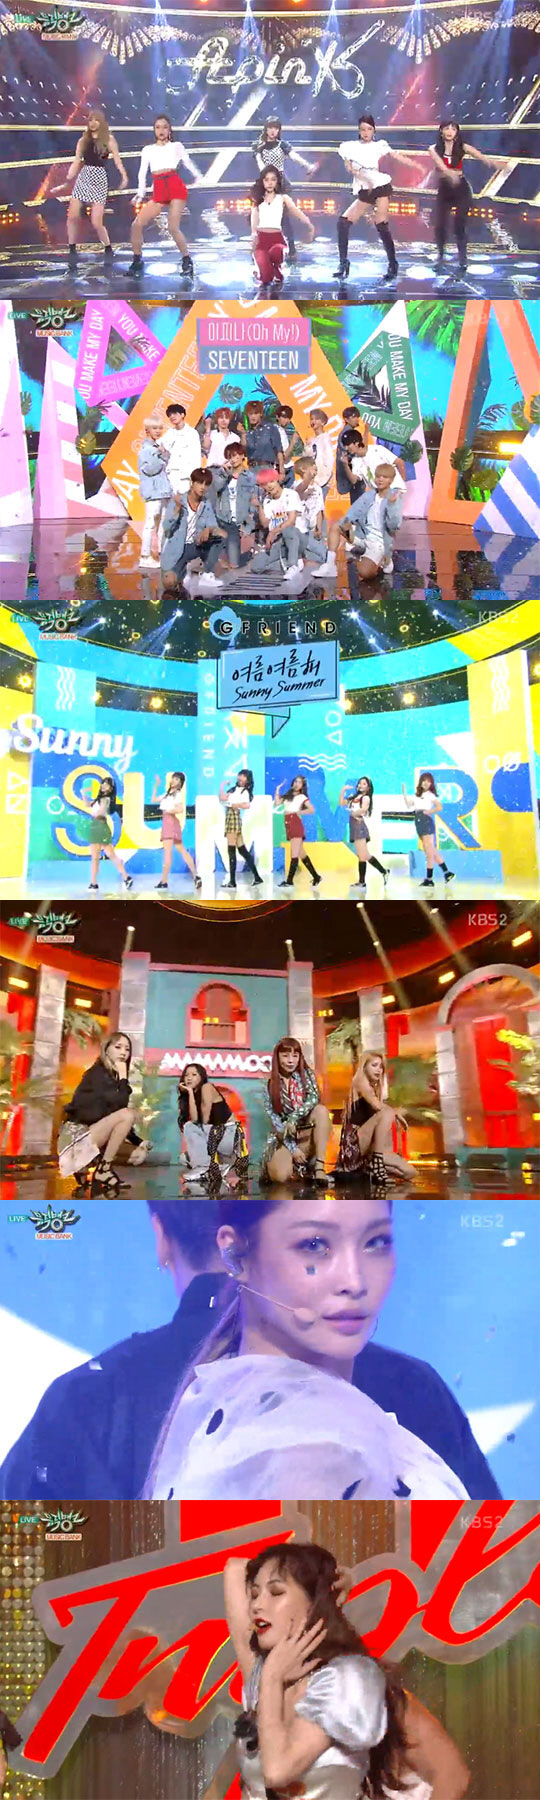 <p>On the 20th KBS 2TV Music Bank, the first week in July, Lucky Twices Night Away From Dance broke Black and Pinks Tsutsu and went up to No. 1. Lucky Twice followed the show champion and em countdown after the comeback, and ran three music crowns.</p><p>Lucky Twice gave pleasure to the fans, Once we were ranked No. 1, we thanked the affiliates and family members. Lucky Twice spread the encore stage with flapping ice on both cheeks as McChees visual on visual cue as previously announced.</p><p>On this day, on the Music Bank K chart, this pinks No One and the New Eastern Ws Depthened View , Volpalgans Adolescence Travel ranked third and fifth. Samu of the ninth seminar, Fay Club of the bulletproof boyhood group, Black, Pink Forever Young, Mel Romance Assimilation, Beetbies You must not do continued.</p><p>On this days broadcast, MAMAMOO and GFriend, Seventeen, Qinghe, Triple H (who was after Hyuna) all came back and showed the face of summer war. Seventeen diverged the charm of the summer boys, Our dawn is hotter than noon as the title song What to do. Following the Summer Special medley, GFriend showed off his new song Summer Summer Year and unique power coolness. MAMAMOO boasted Latin-style you and me and ballad rainy season and Janus-like charm. Kiyoshi showed off his sense of presence full of his own unique stage. Triple H expanded the retro stage that grouped to Retro Future.</p><p>In addition to these, Music Bank of this day also appeared Promise Nine, Accounting, Golden Child, Ninth Seminar, Maitin, Momo Land, Shin Hyun Hui and Kim Rut, this Pink, Ellis, Yuen Rain and so on. The September 15th Music Bank World Tour to be held in Berlin, Germany, was also announced.</p>